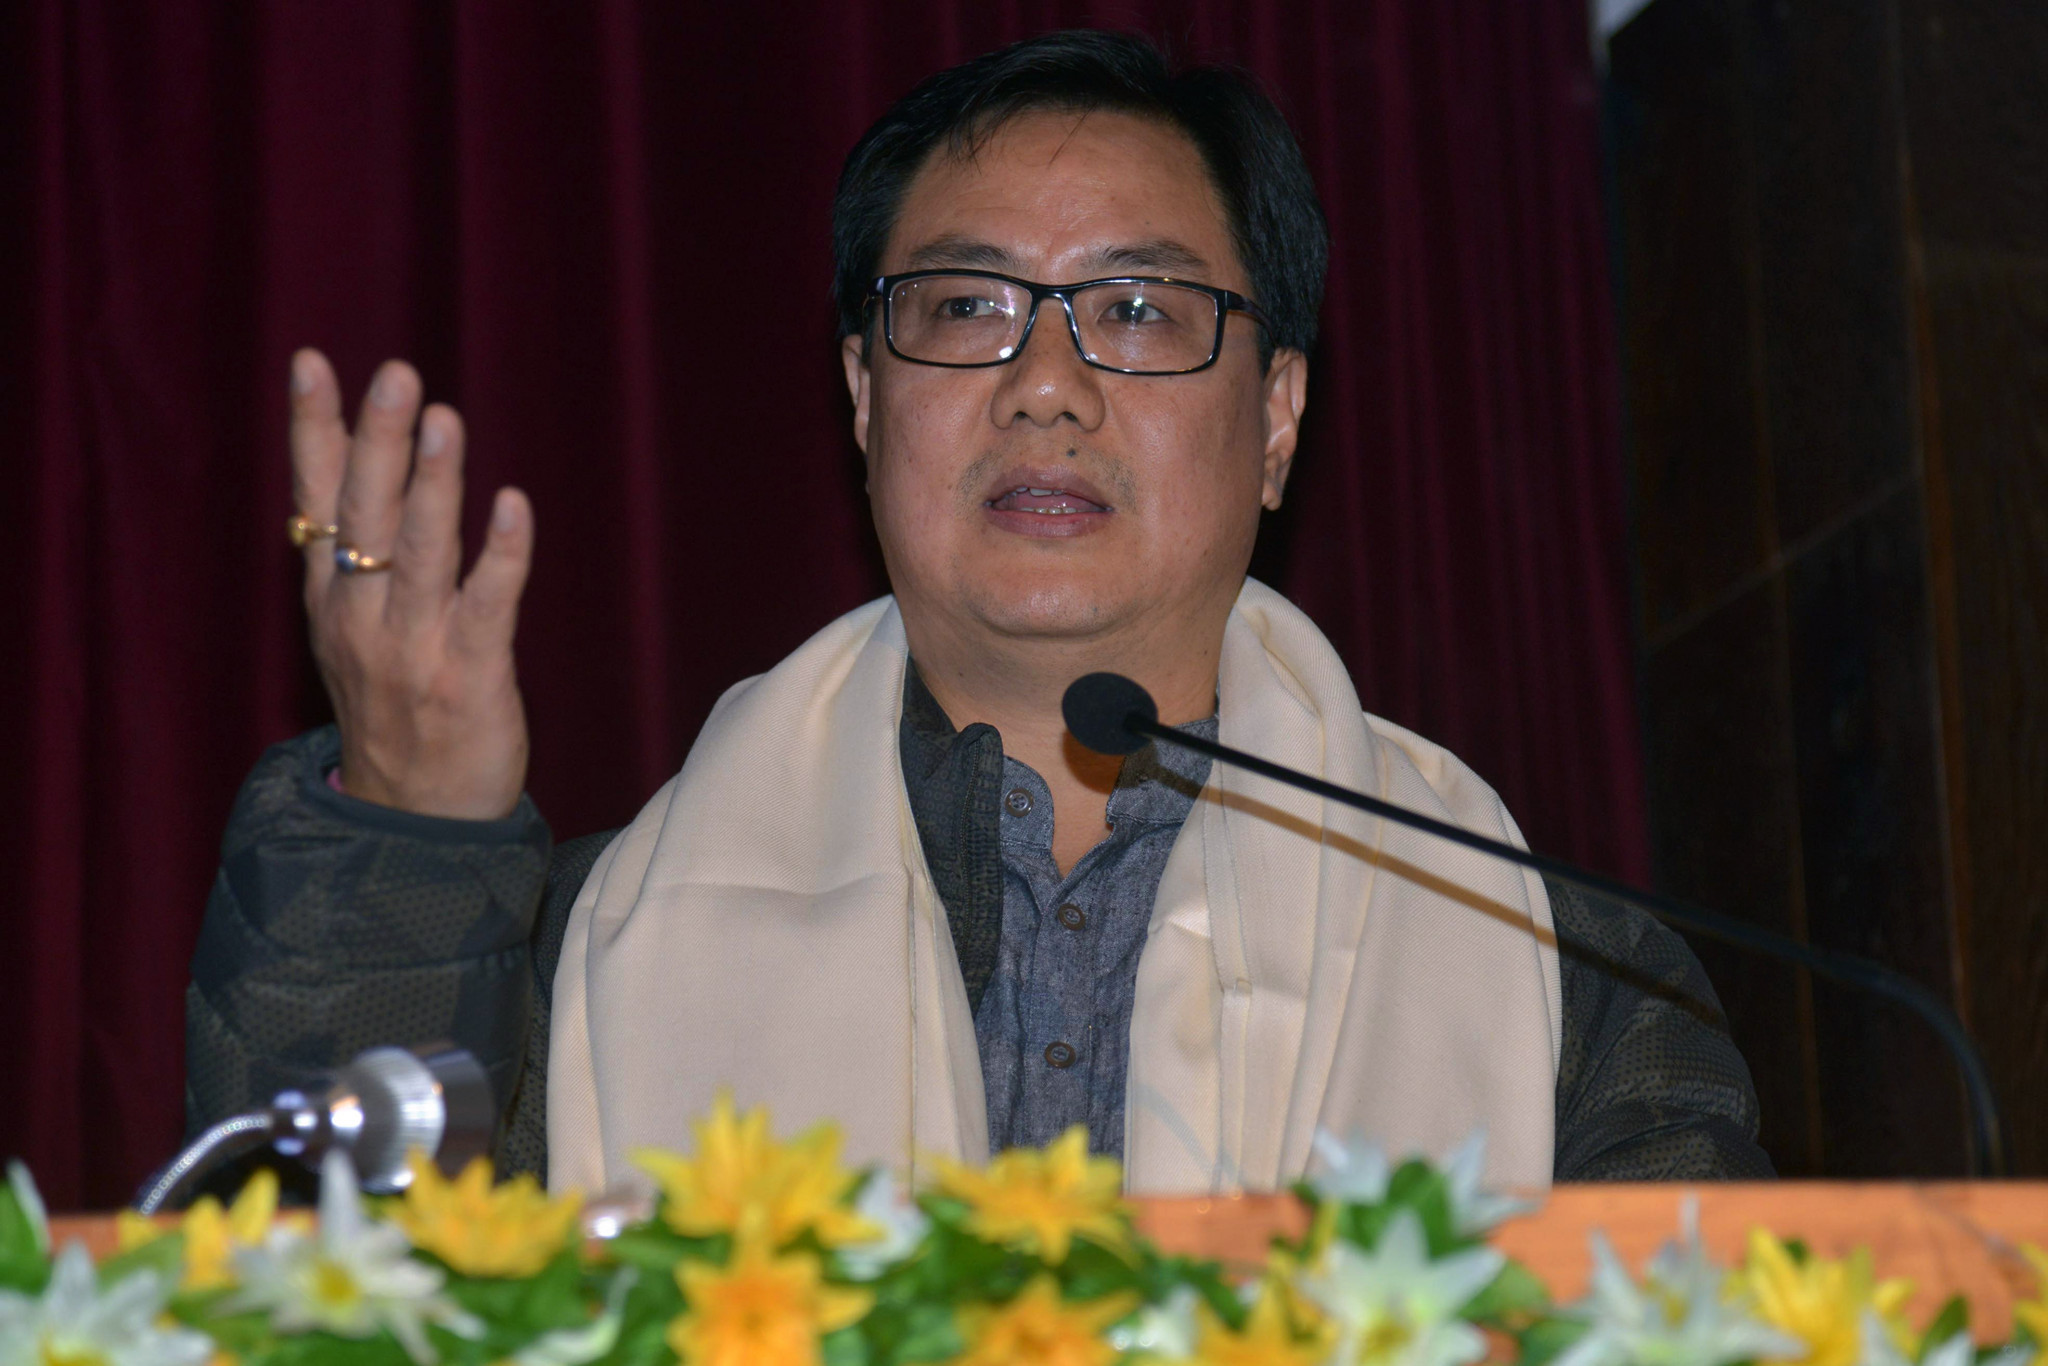 Kiren Rijiju says there is "no doubt in his mind" that the country will break into the top 10 of the Summer Olympics medal table by Los Angeles 2028 ©Getty Images